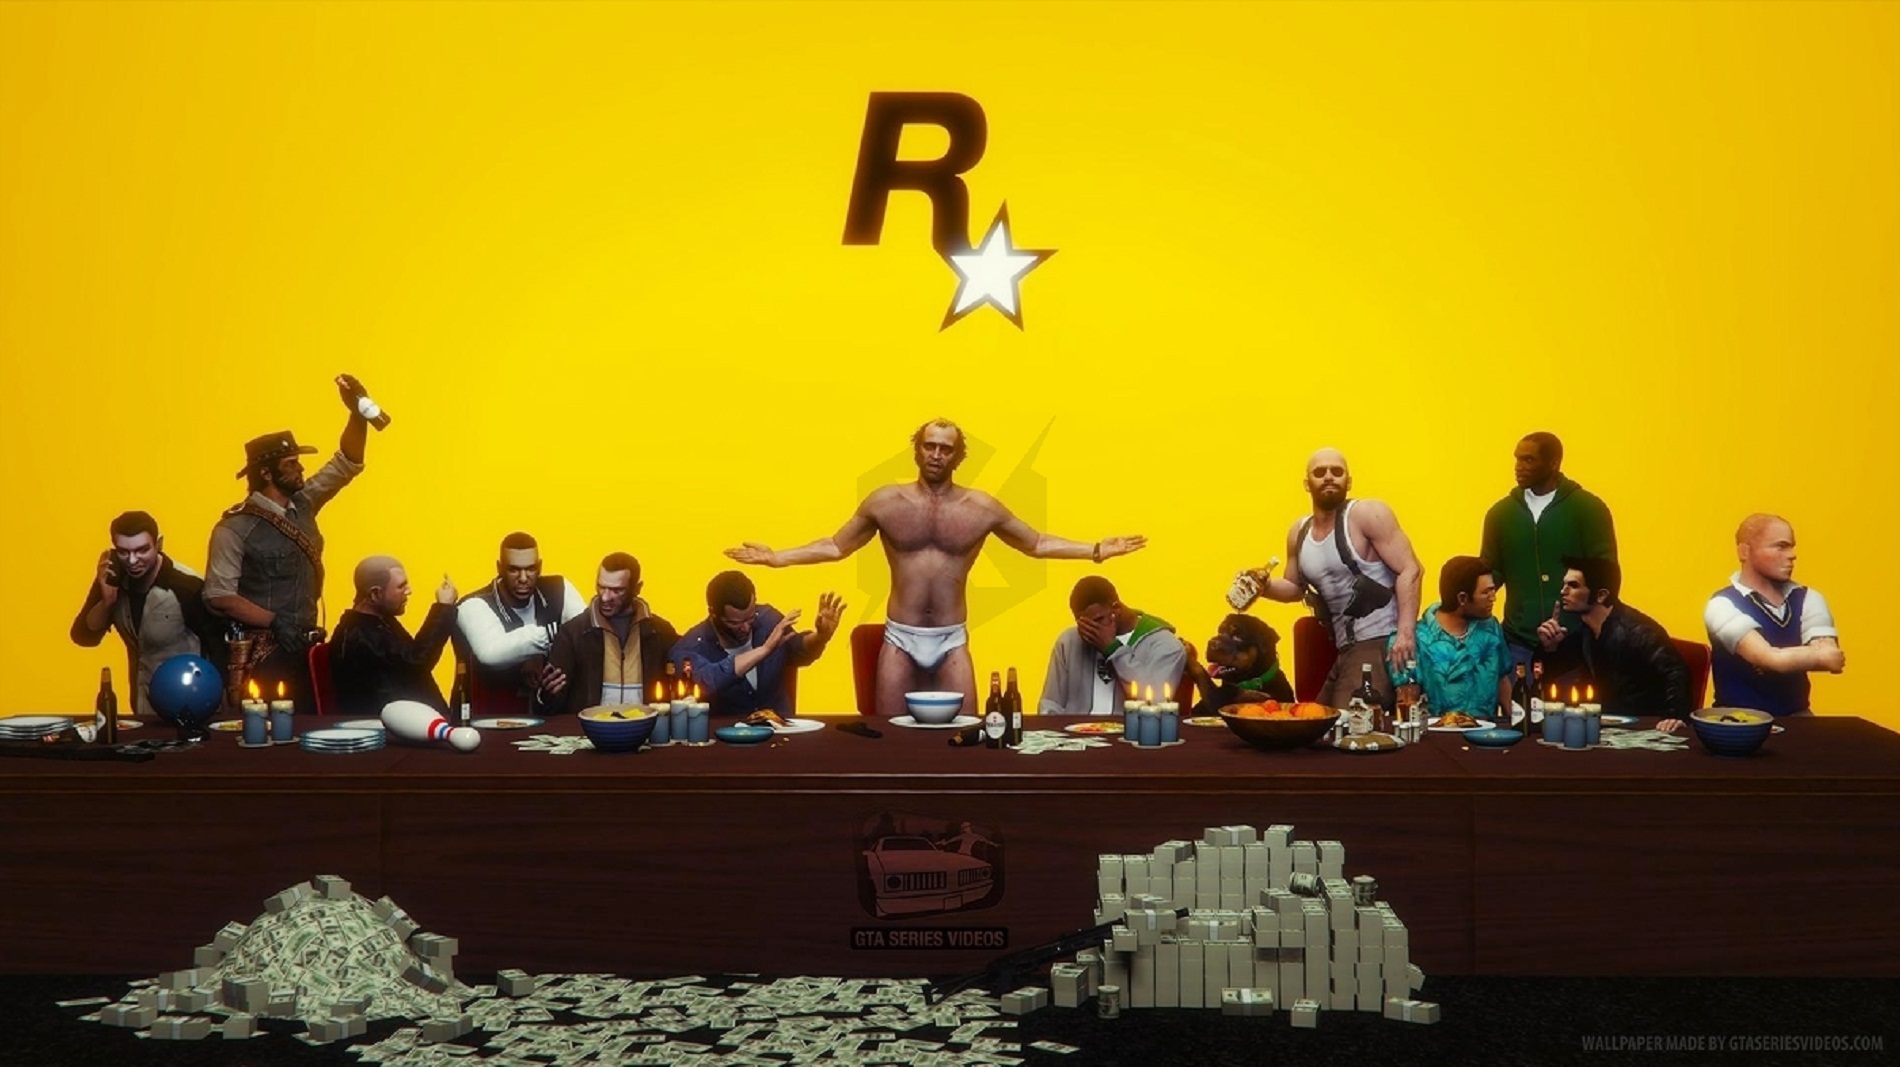 Rumors Circulate That Rockstar Games May Announce Grand Theft Auto 6 This Coming Week